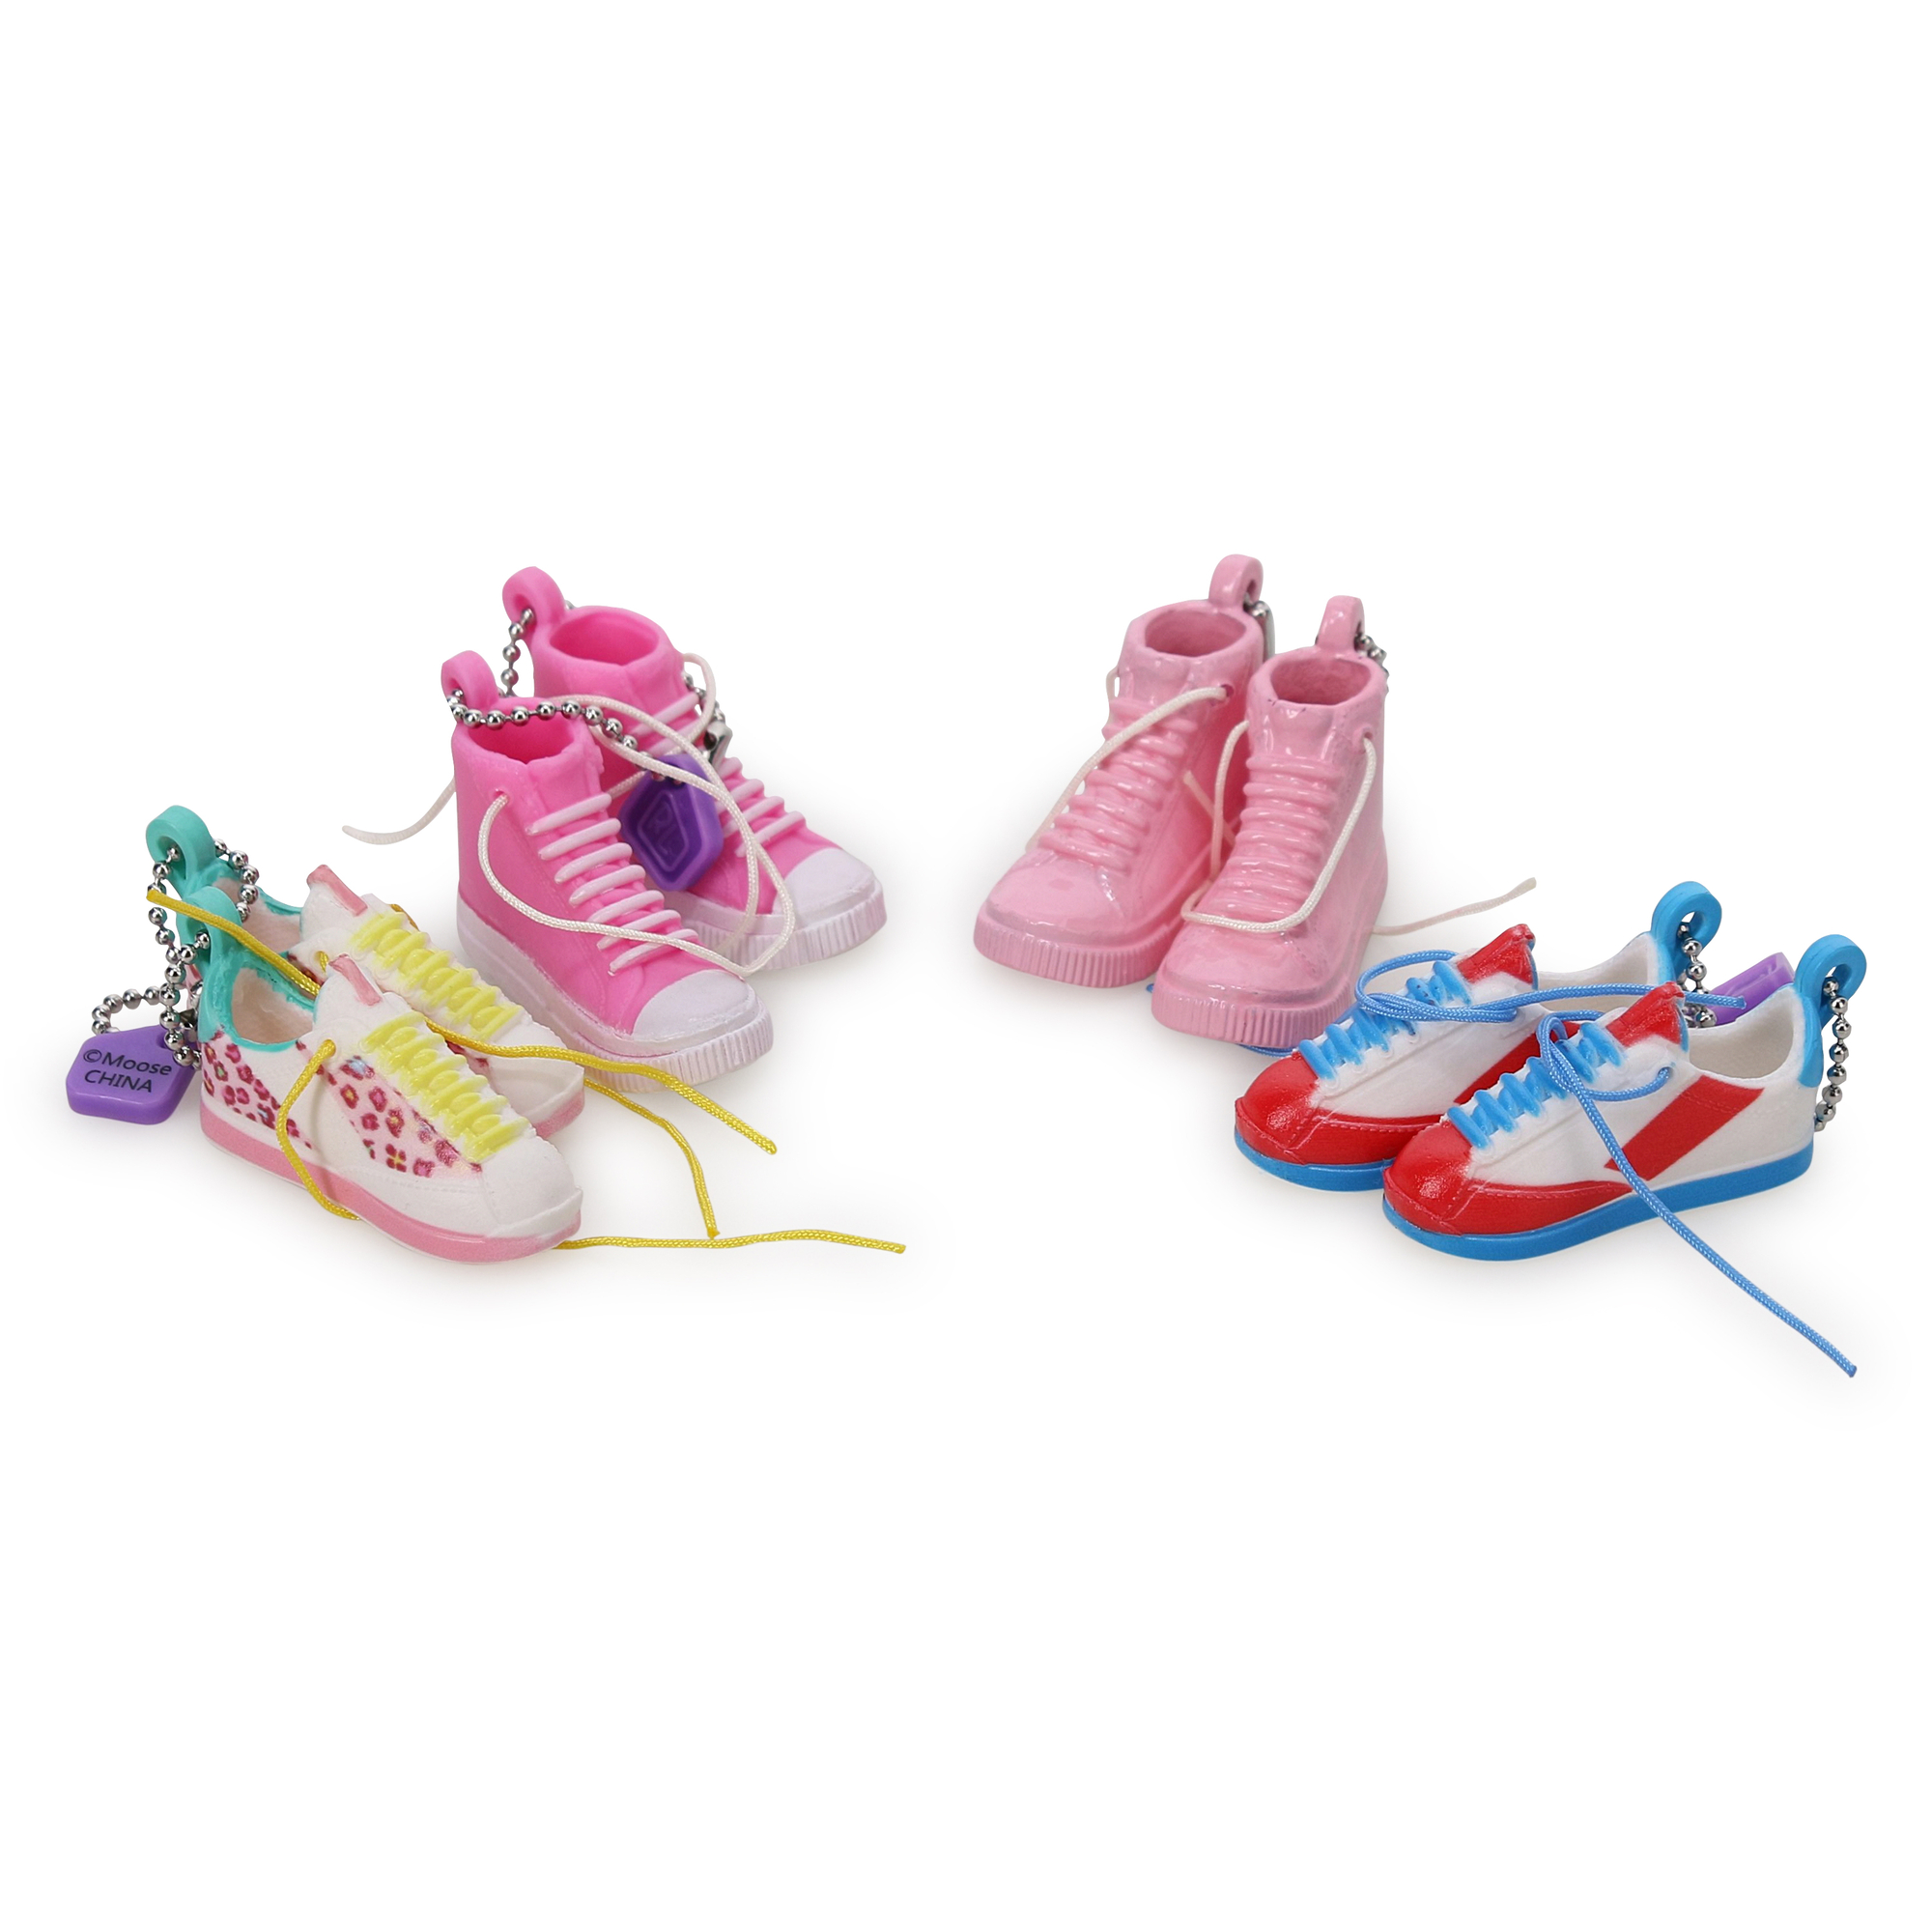  Real Littles Shoes 3 Pack - Bundle with Real Littles Blind Bags  Mini Sneakers Figures Plus Tattoos